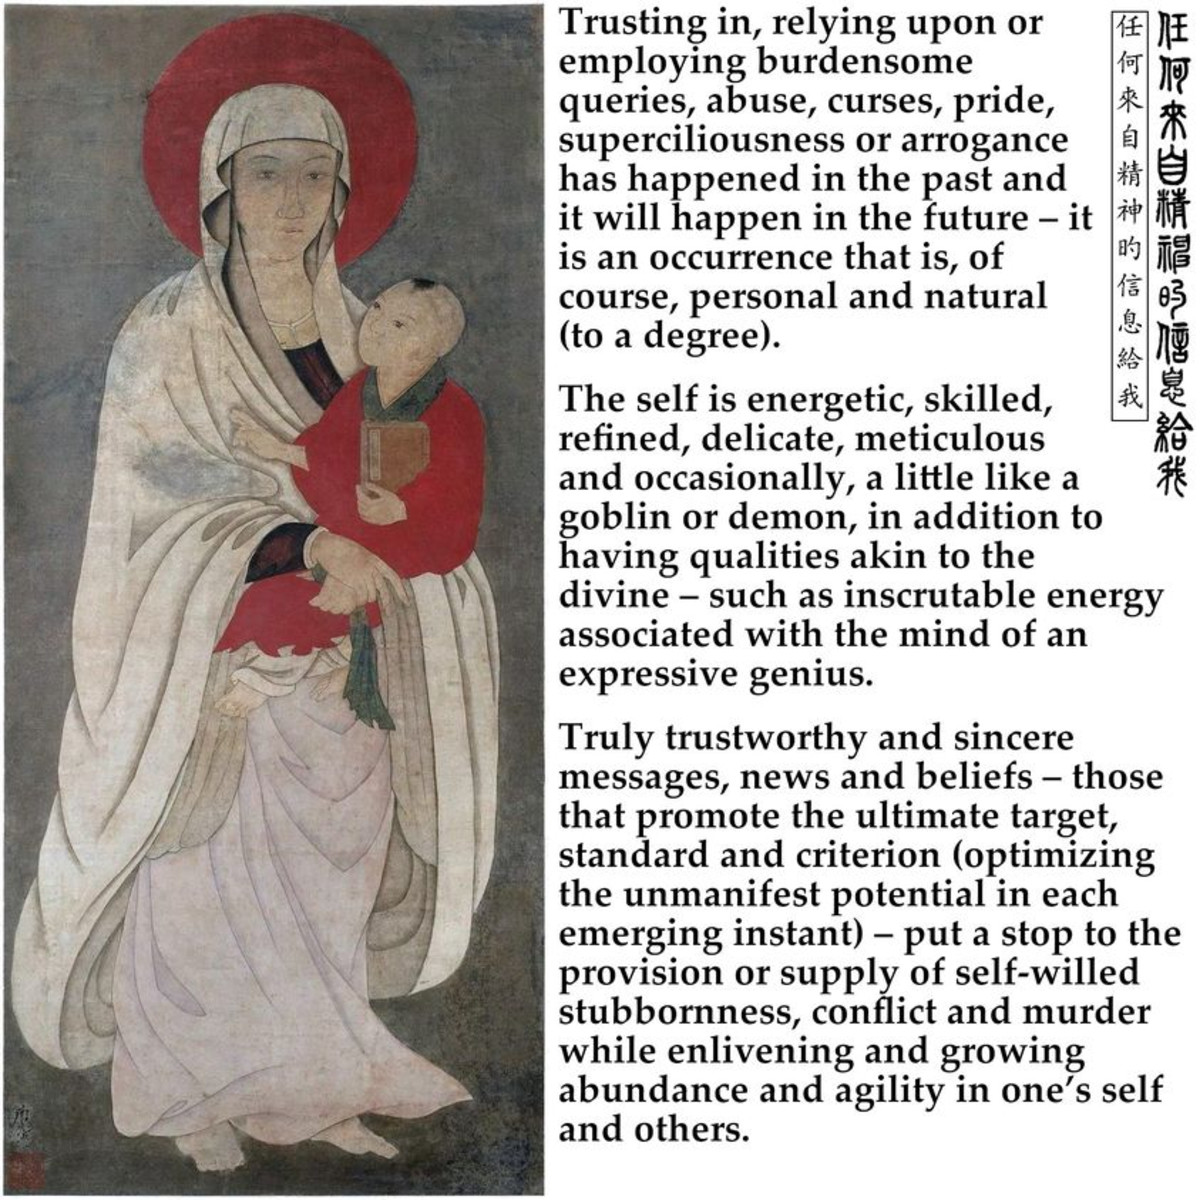 On the left is an image showing a Chinese painting that may date to the late-15th or early-16th Century - it is known as "The Madonna Scroll" (Brockey 2007). To the right is the 'oraculum' noted in the article with ancient and modern Chinese text.